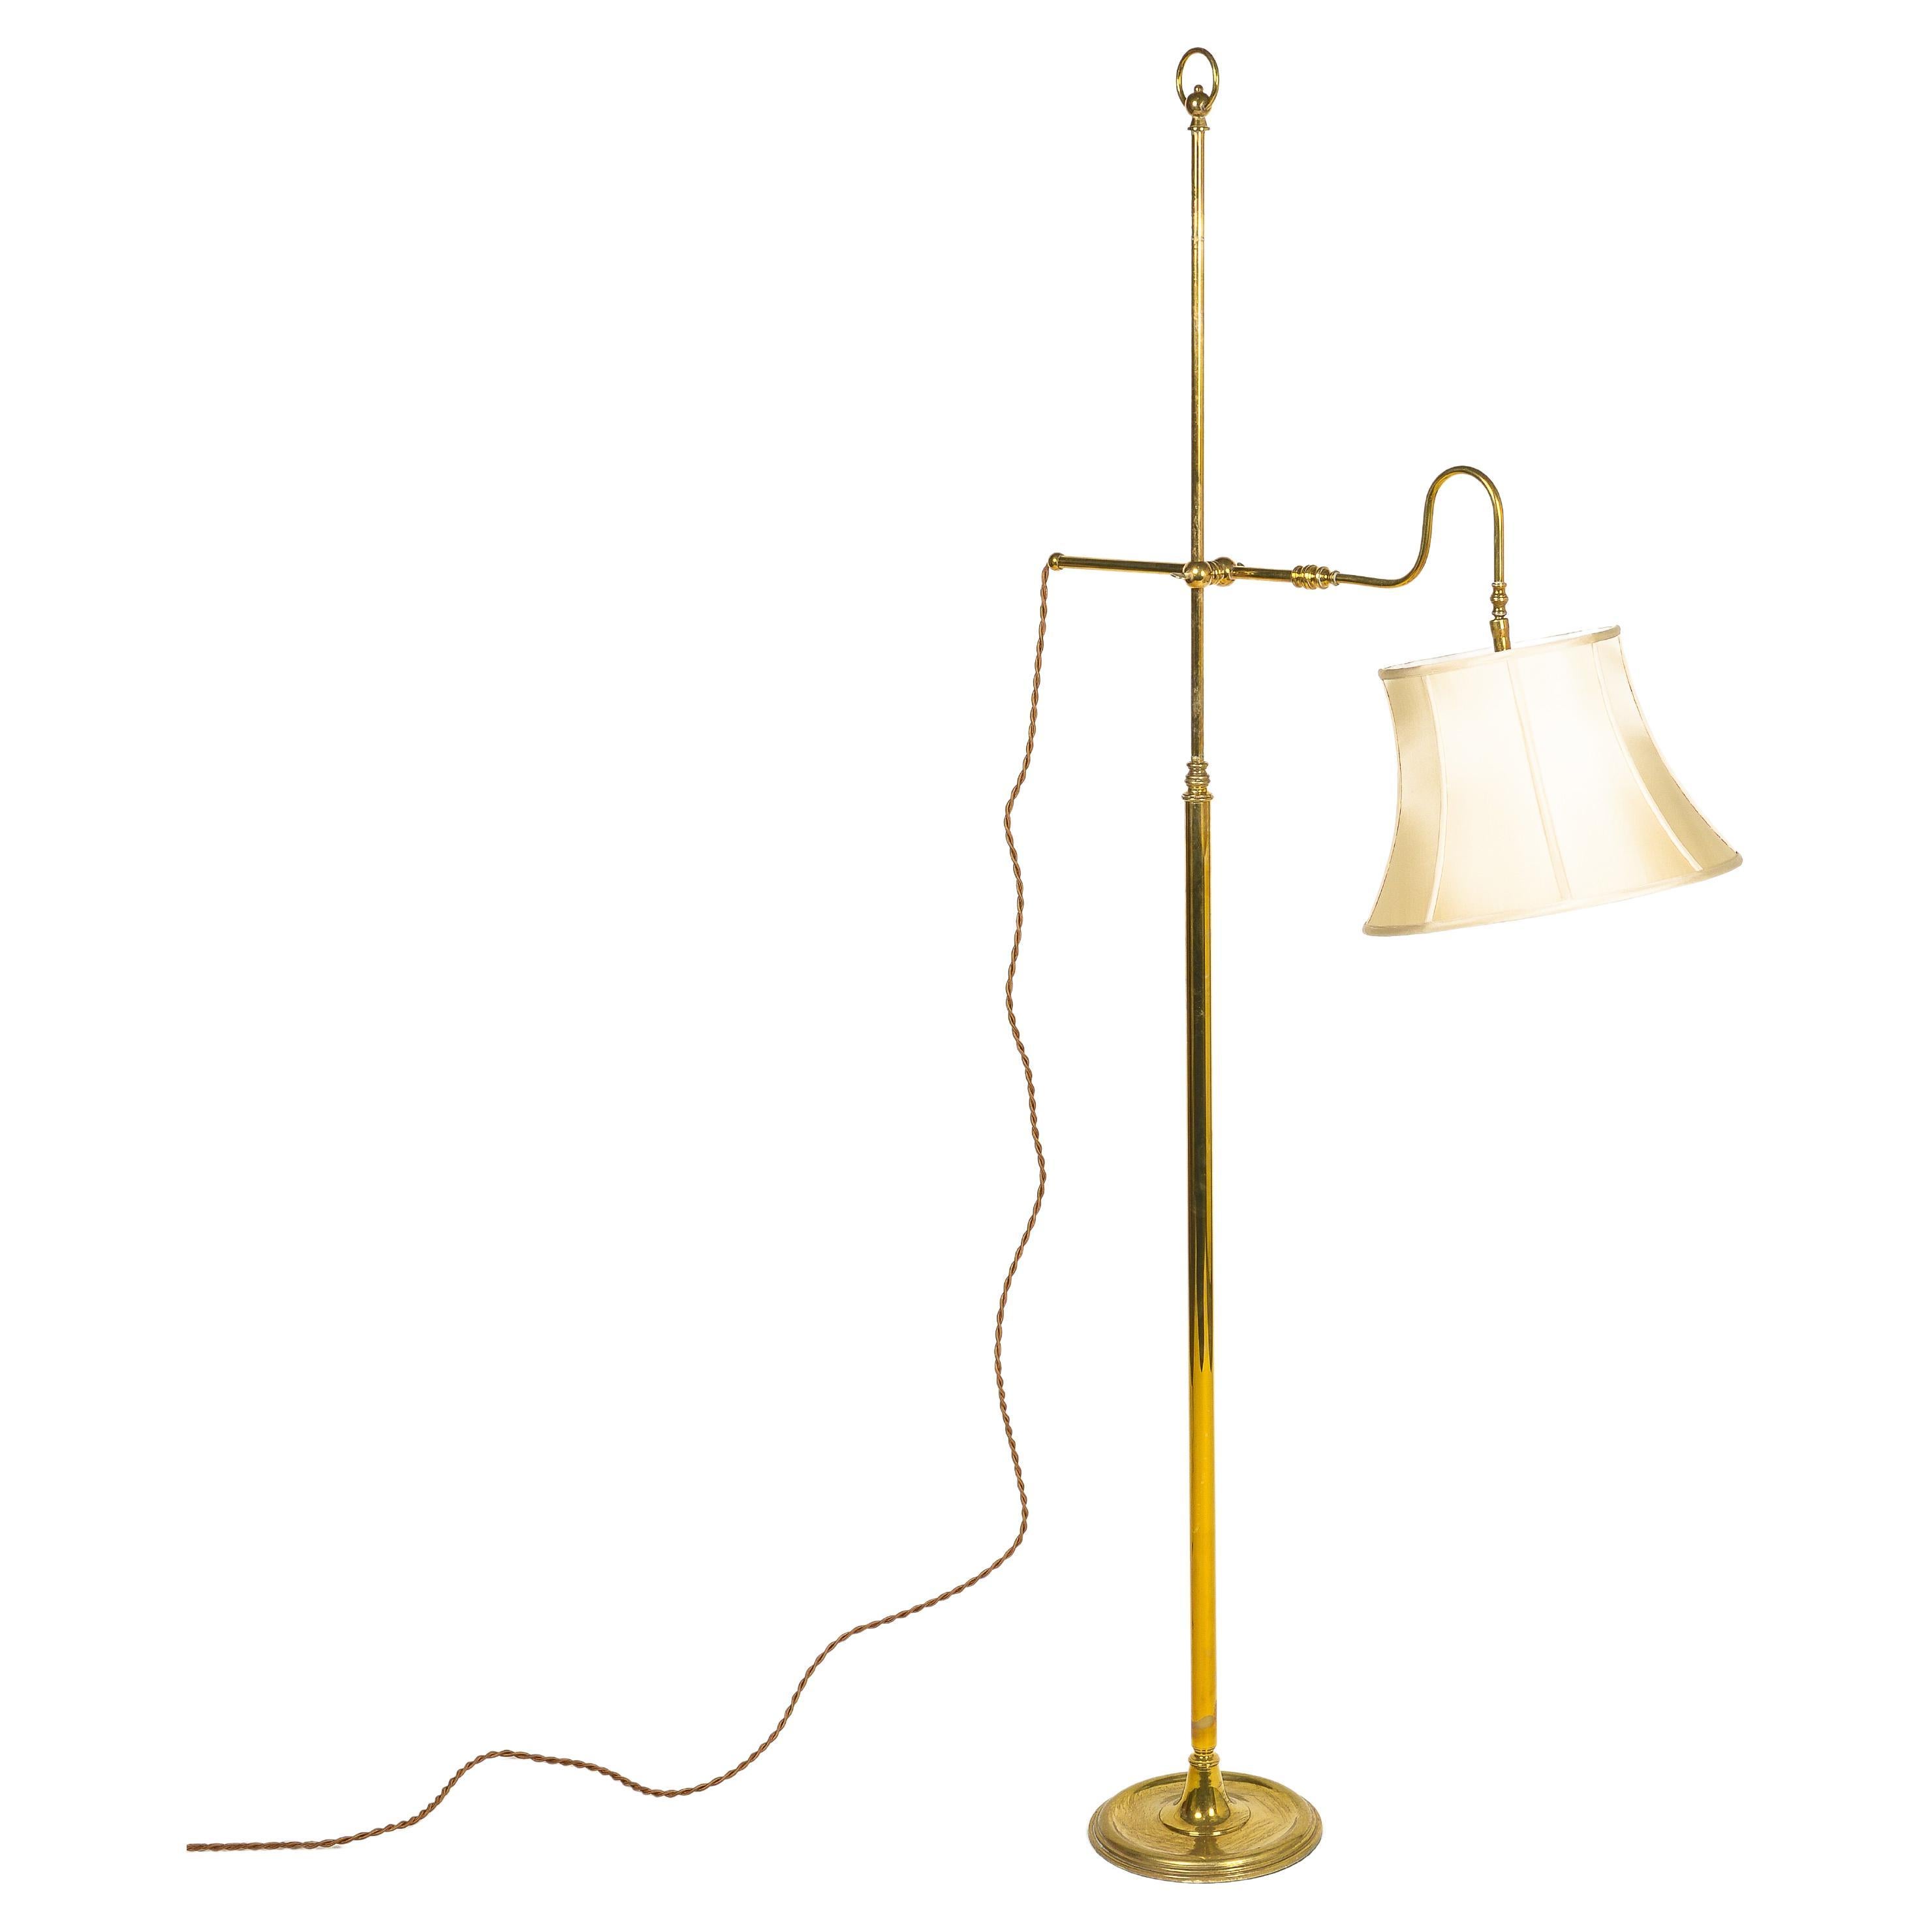 English Polished Brass Library Floor Lamp For Sale